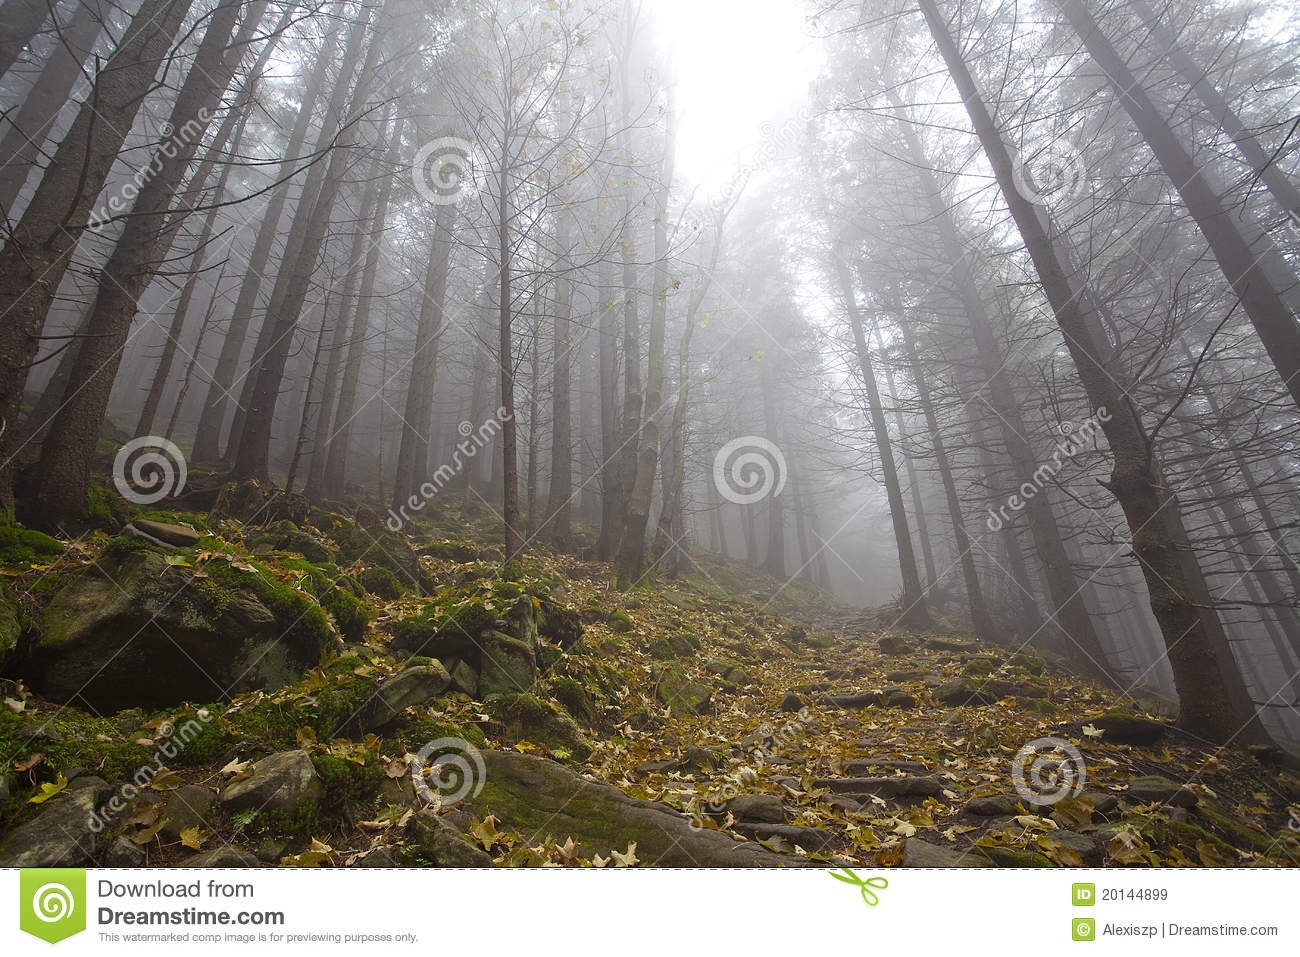 Foggy Mystery Forest With Trees In Fall Royalty Free Stock Images